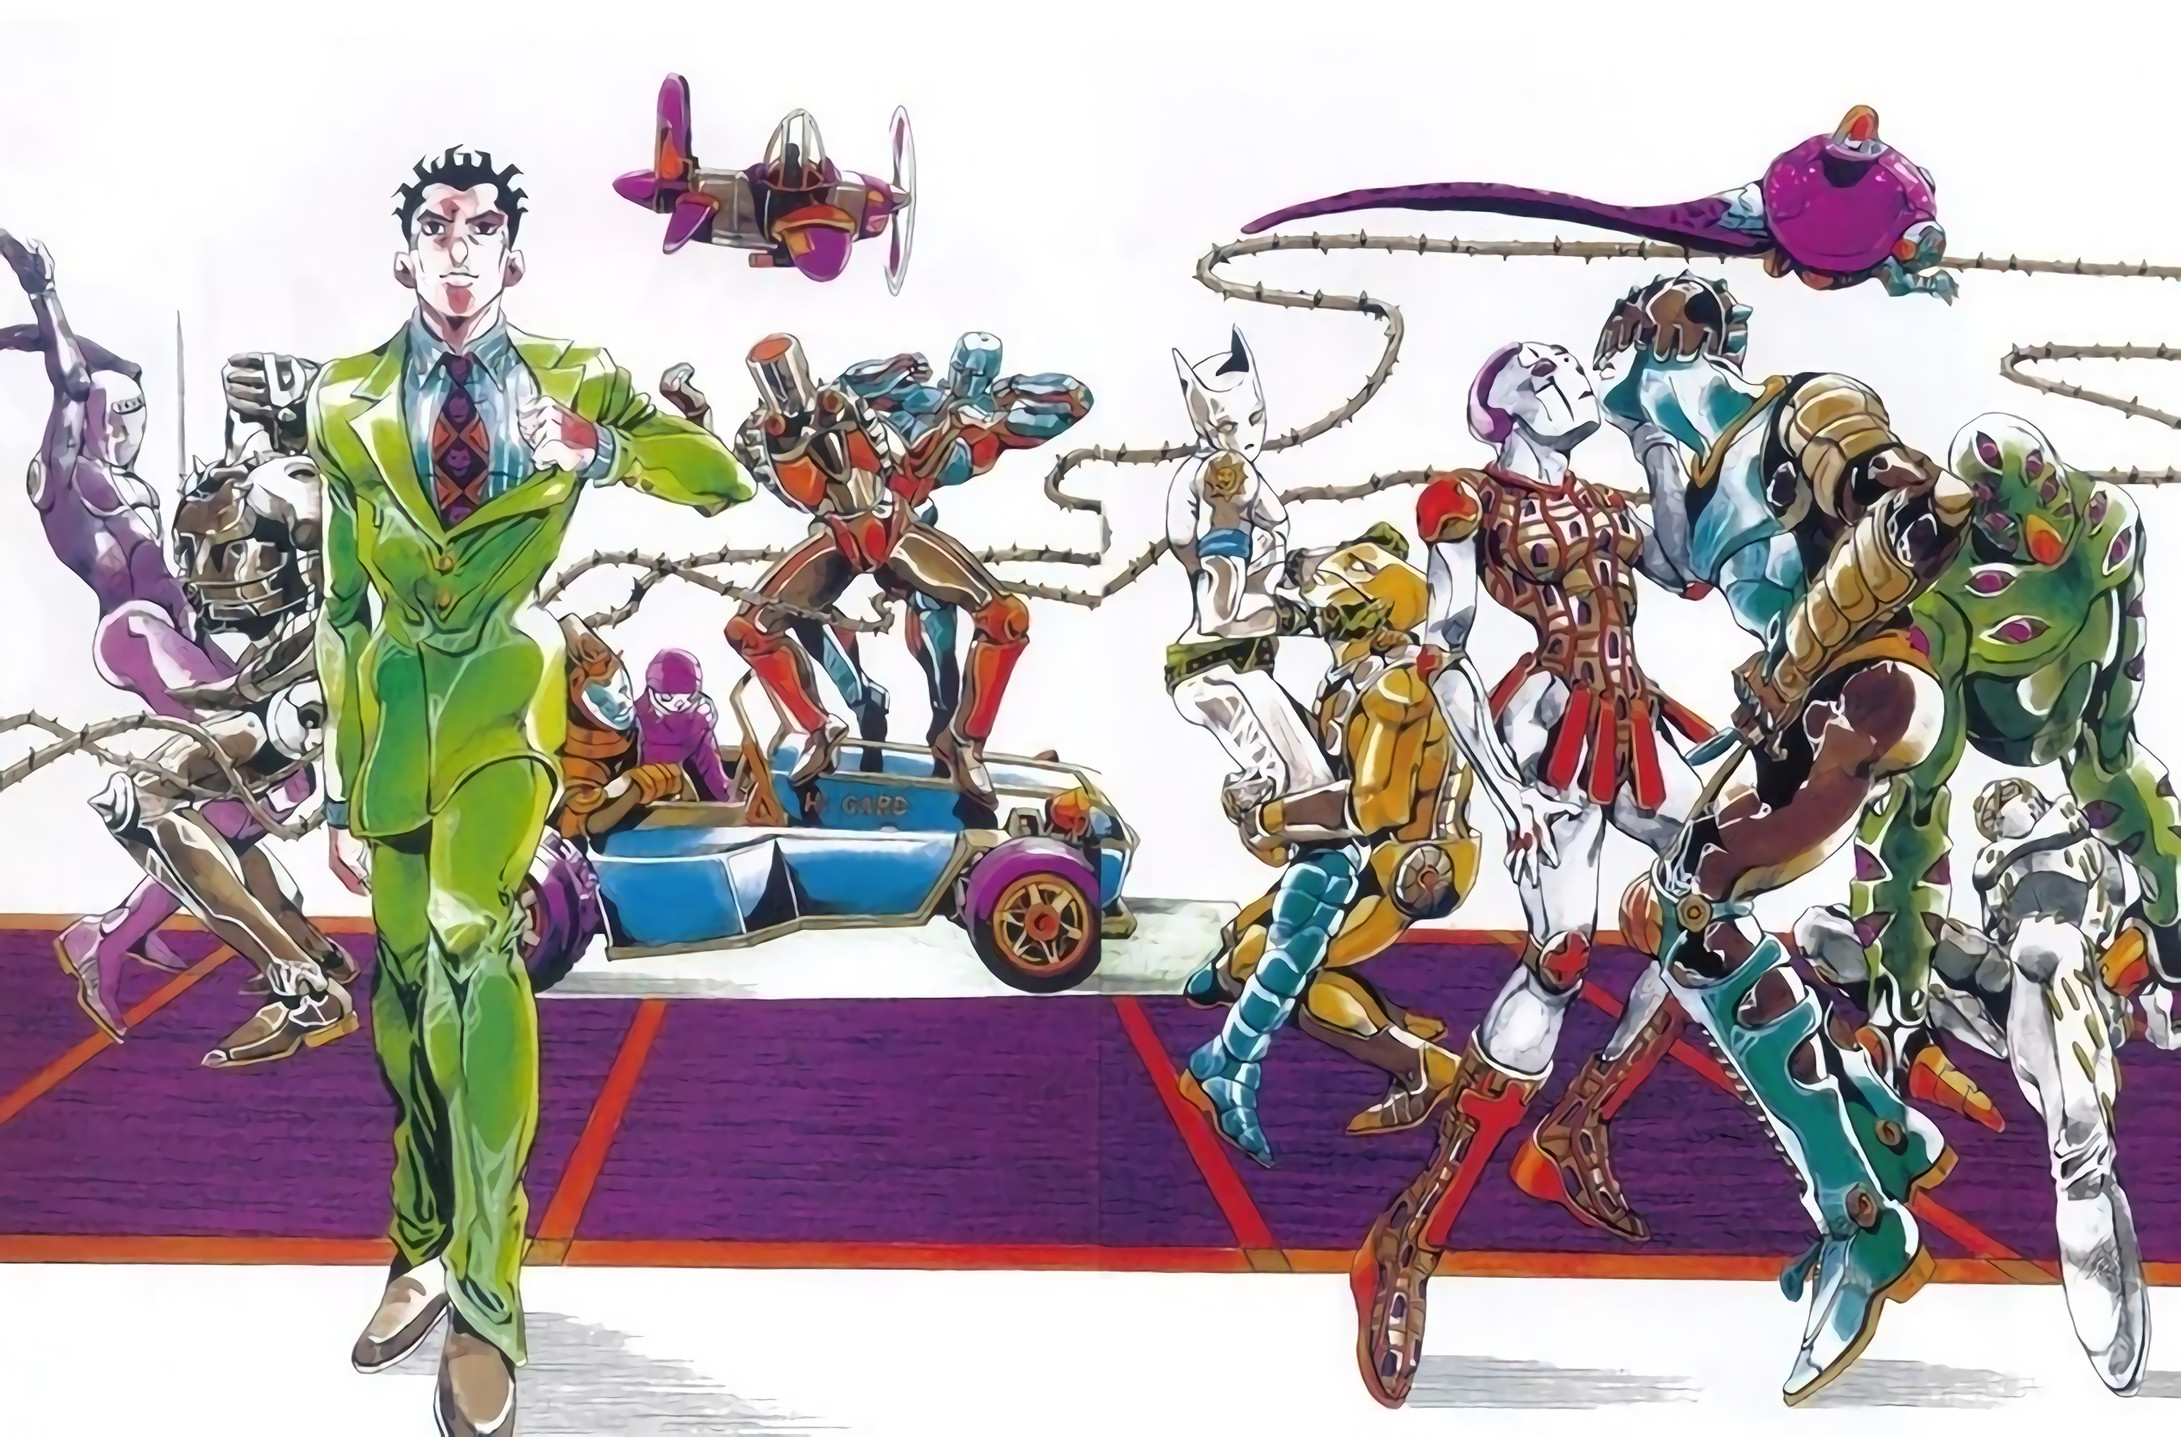 2181x1437 ... I had to share the best piece of art Araki ever made